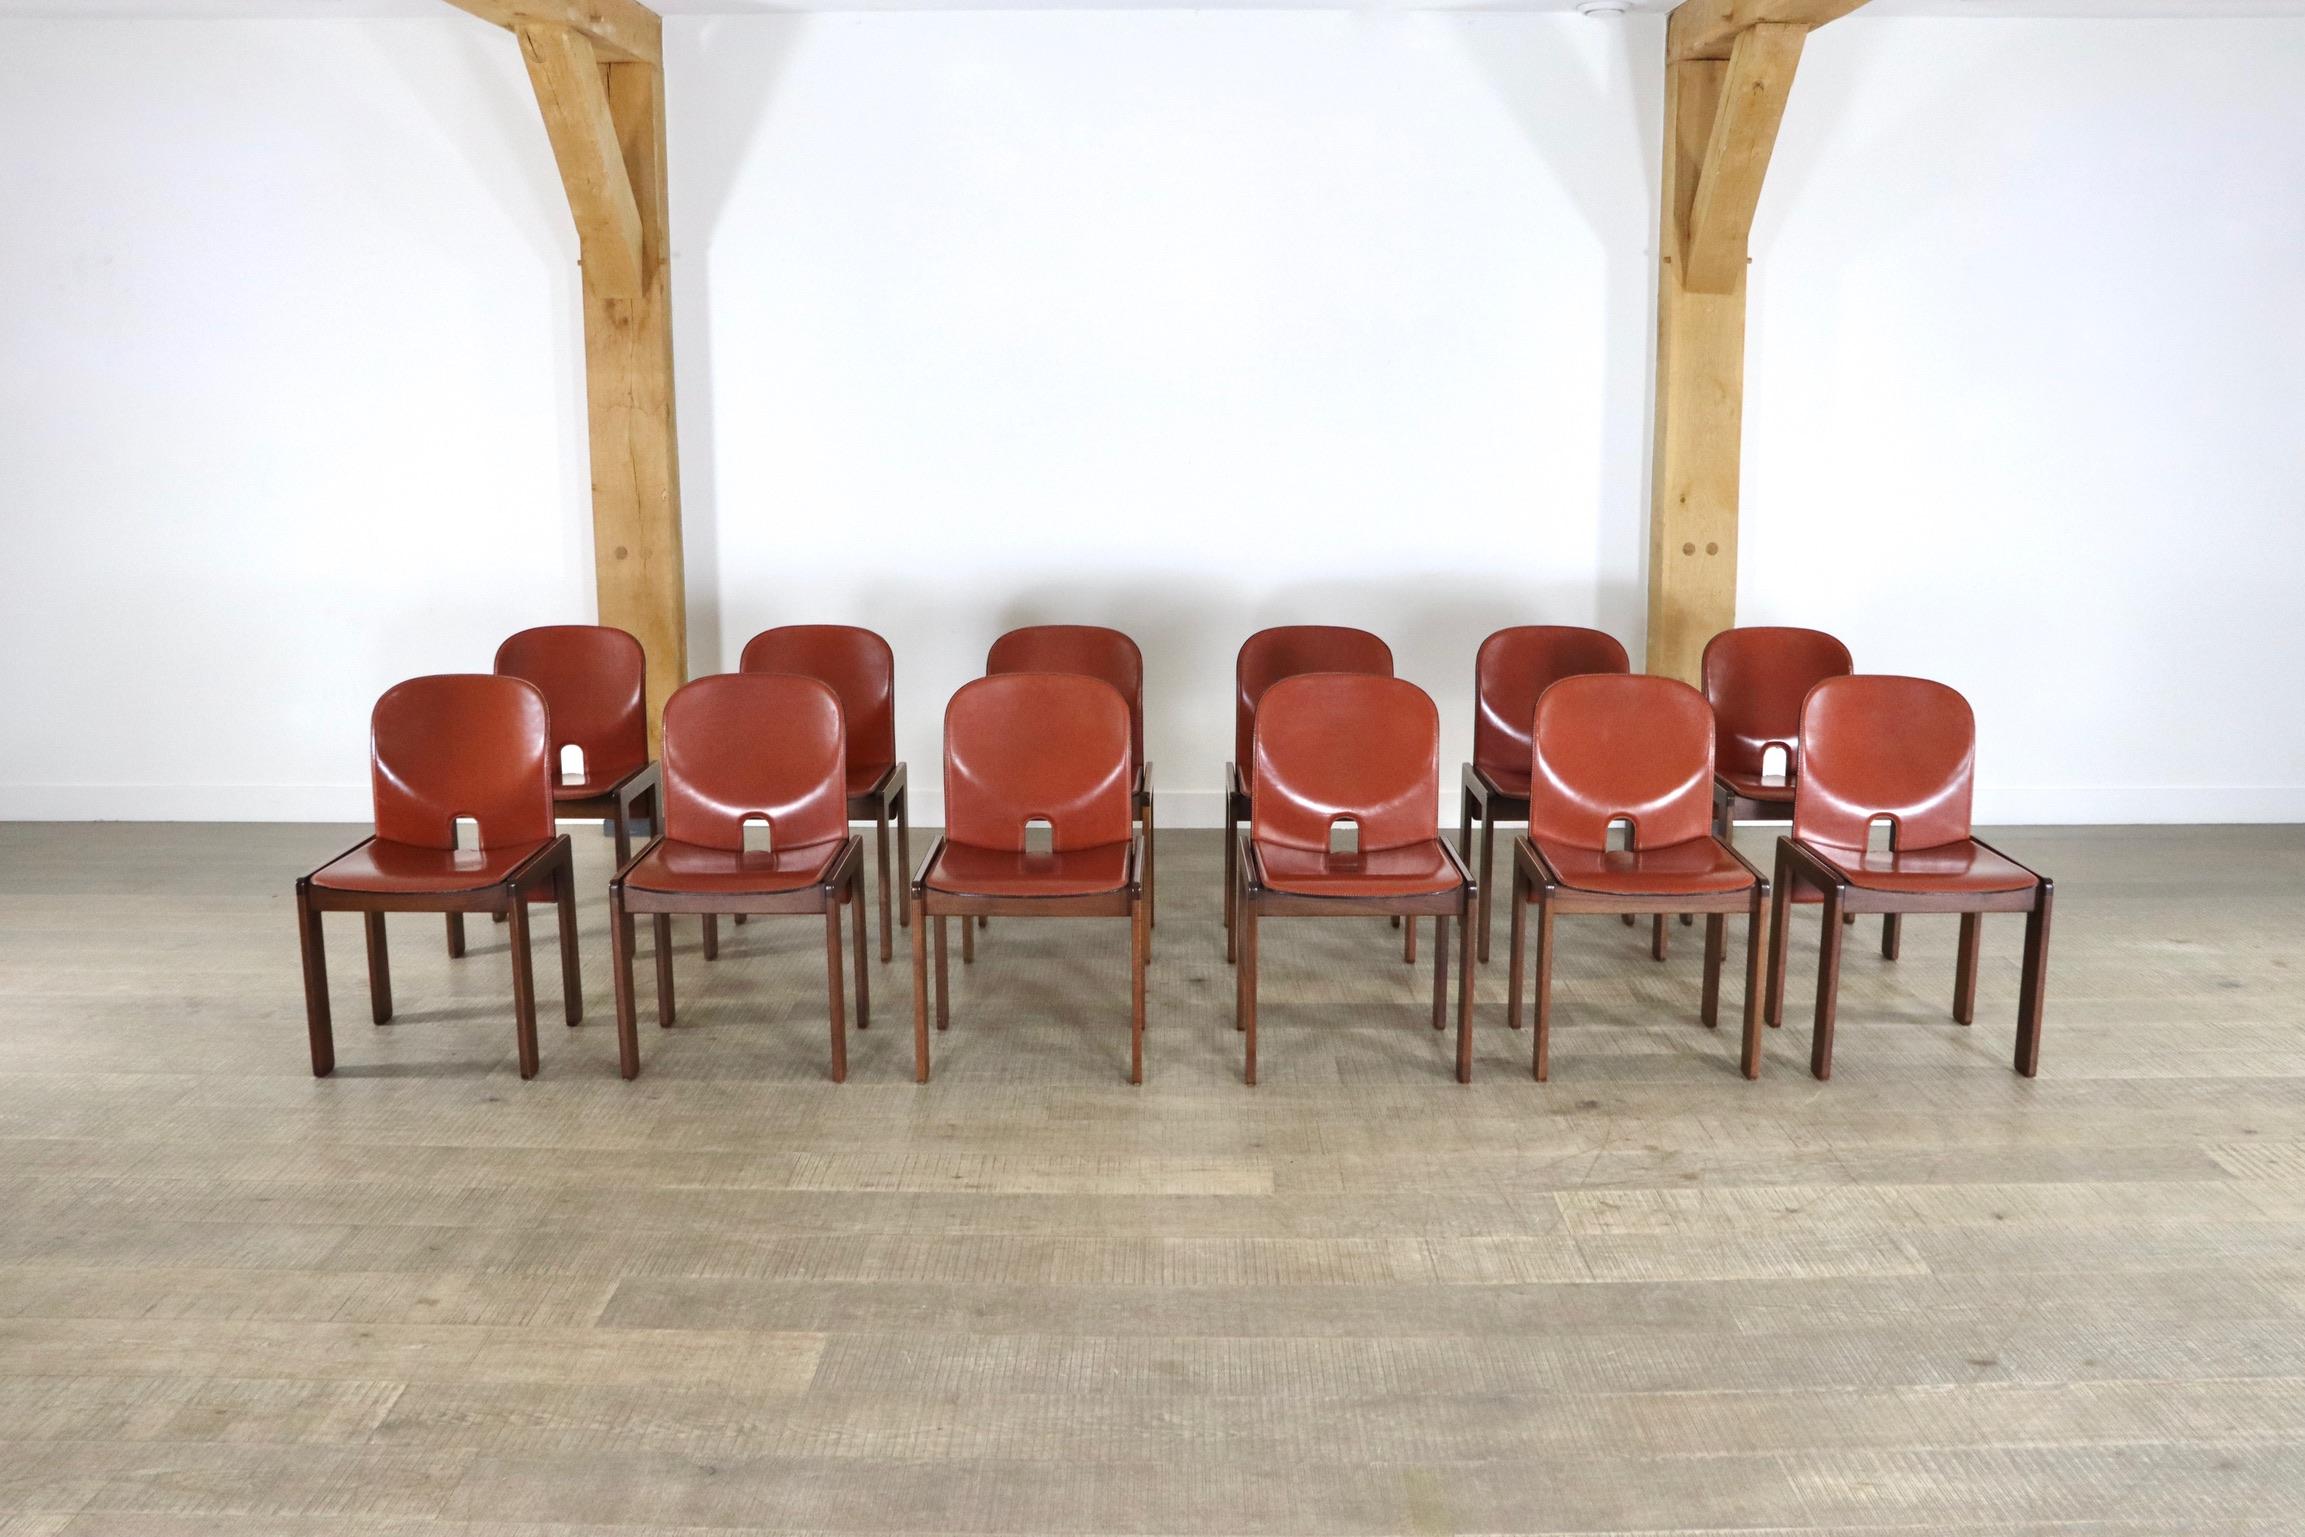 Outstanding set of 12 model 121 dining chairs in cognac leather by Afra and Tobia Scarpa for Cassina, 1965. The chairs have walnut wooden frames and plywood seats and backs covered with the original cognac leather. All chairs are marked with a